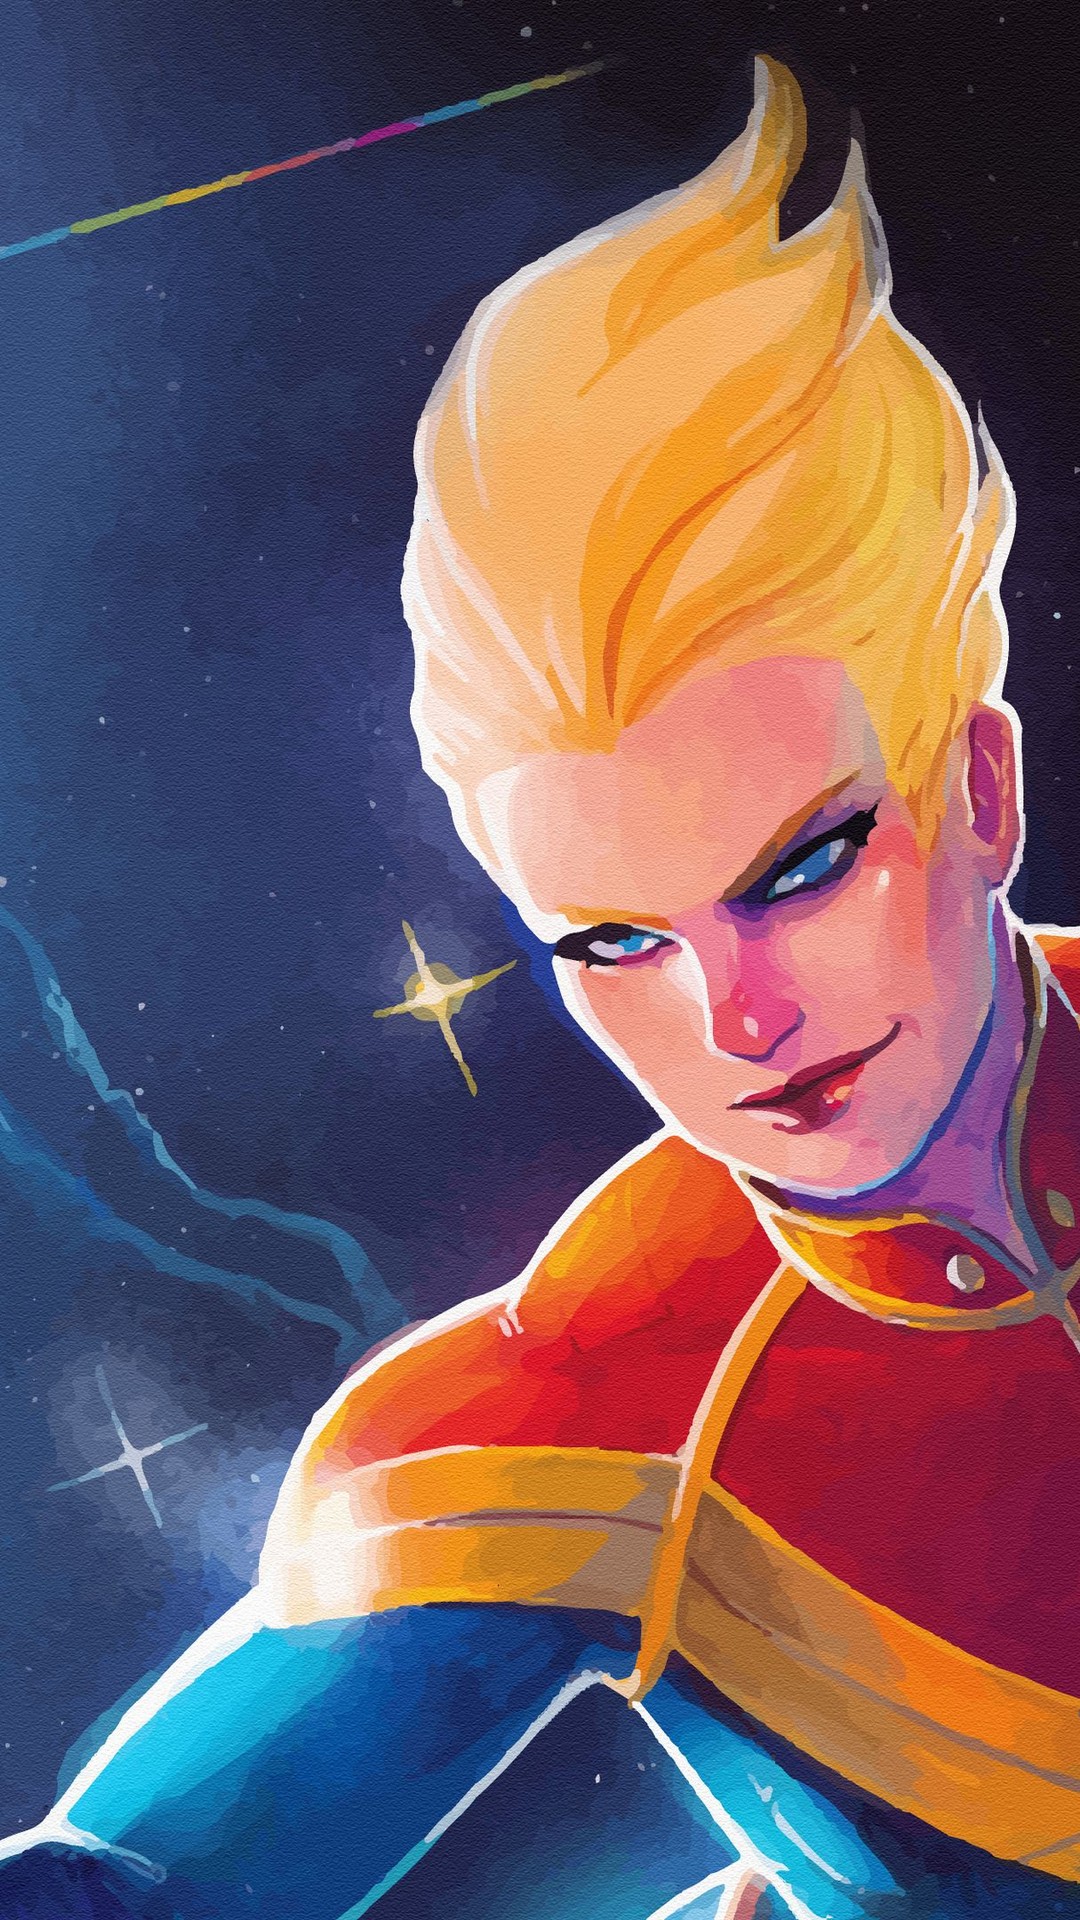 Wallpaper Captain Marvel Animated Android with high-resolution 1080x1920 pixel. You can use this wallpaper for your Android backgrounds, Tablet, Samsung Screensavers, Mobile Phone Lock Screen and another Smartphones device